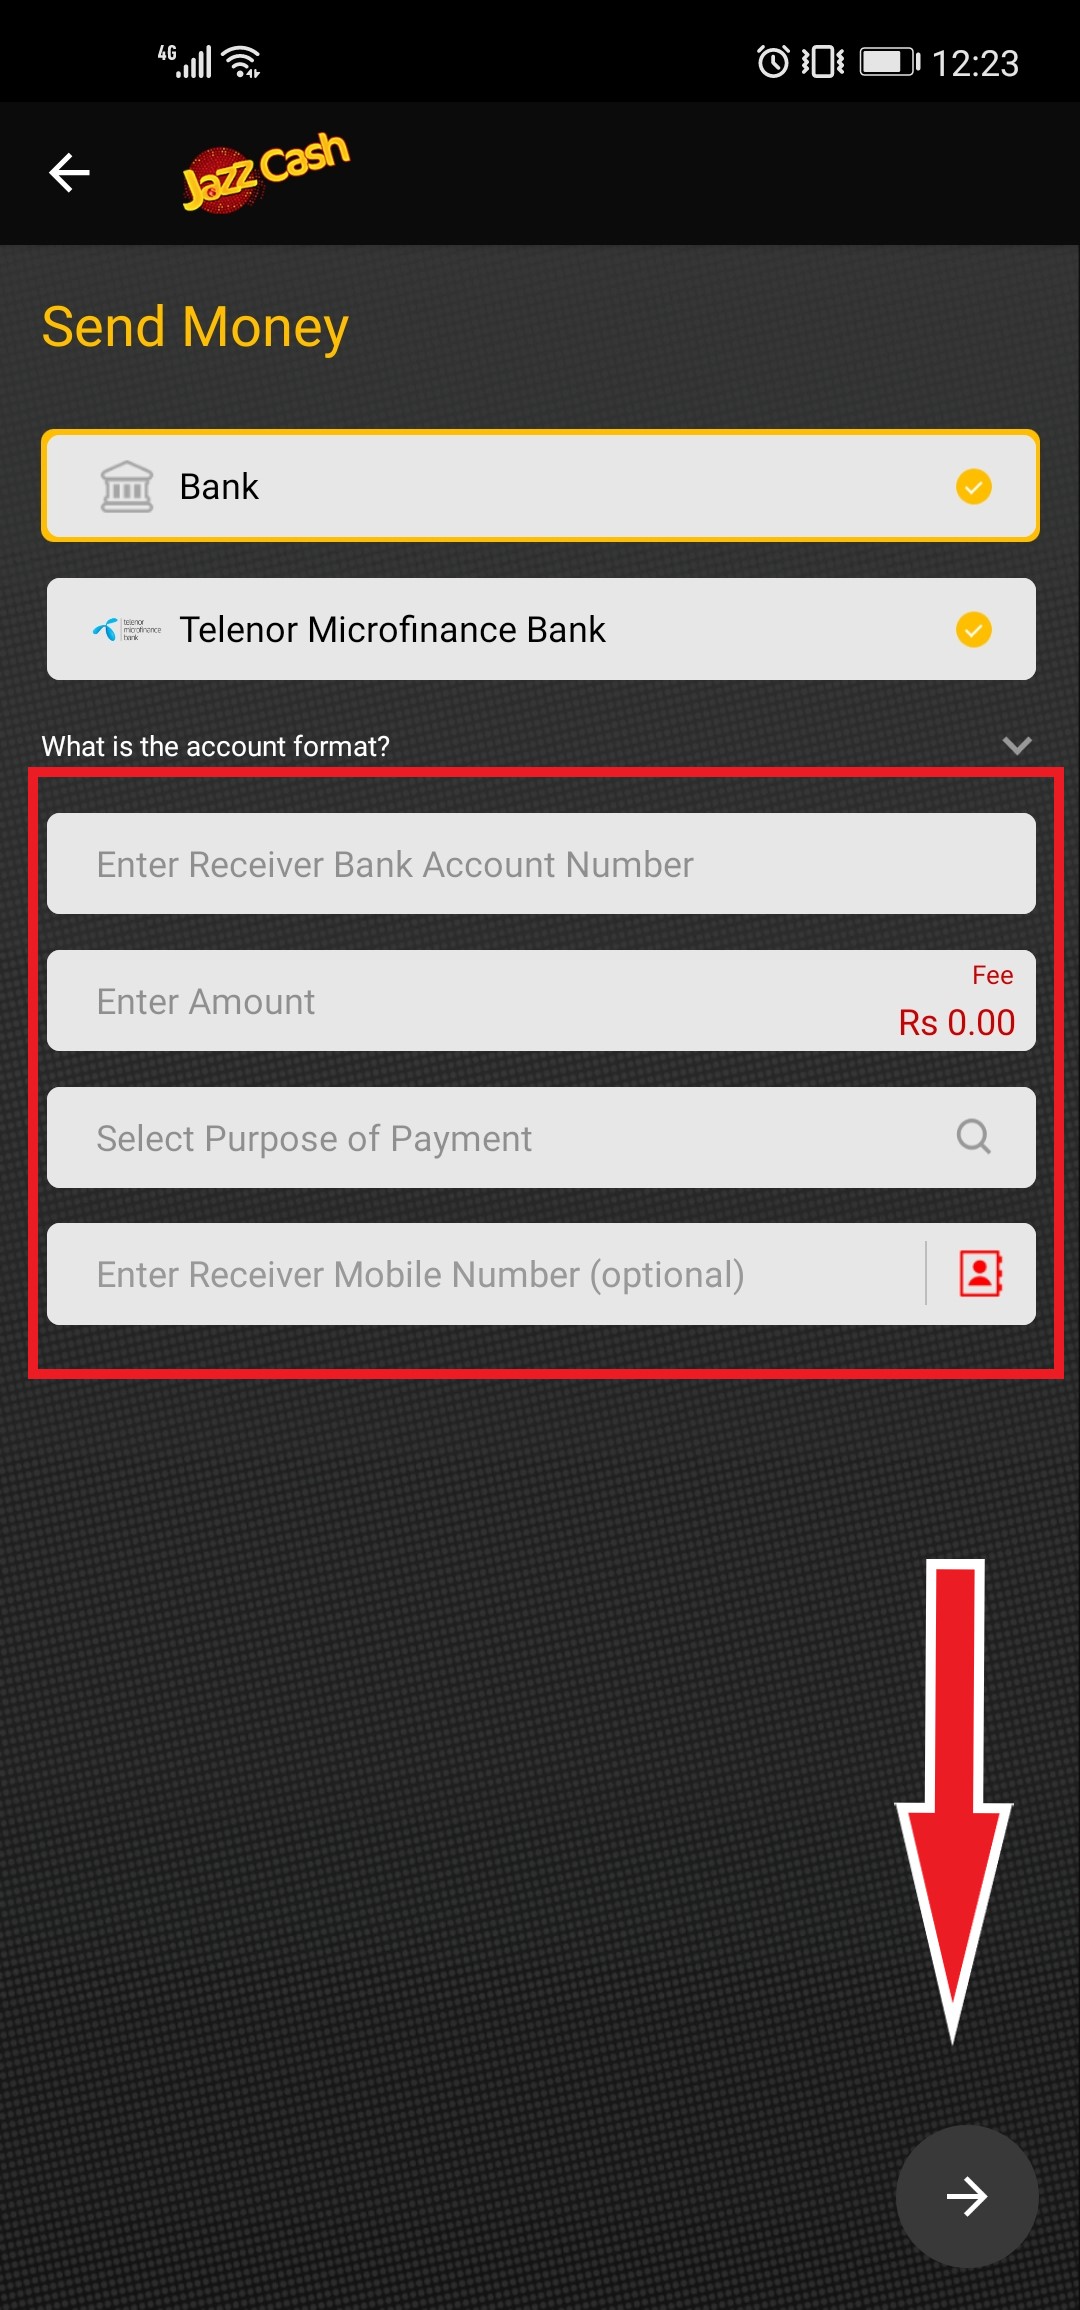 How To Transfer From JazzCash To Easypaisa